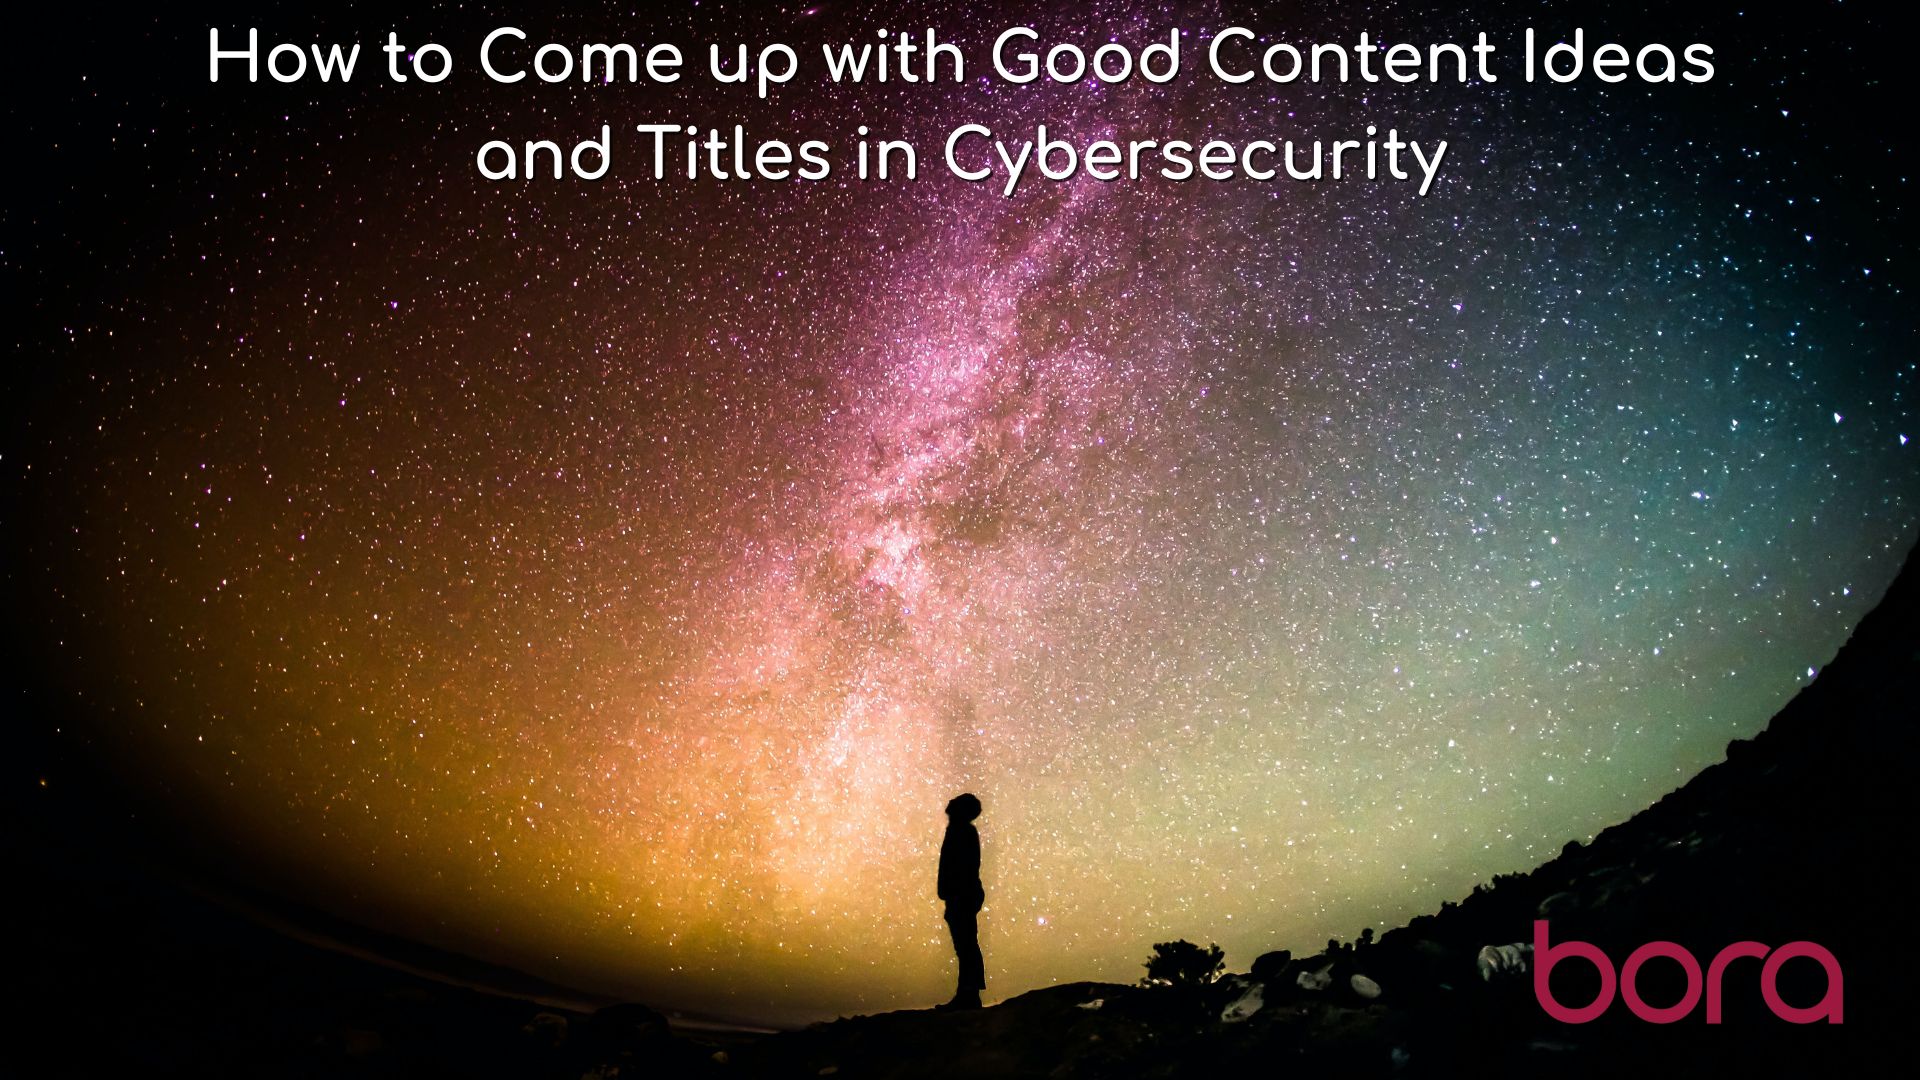 How to Come up with Good Content Ideas and Titles in Cybersecurity